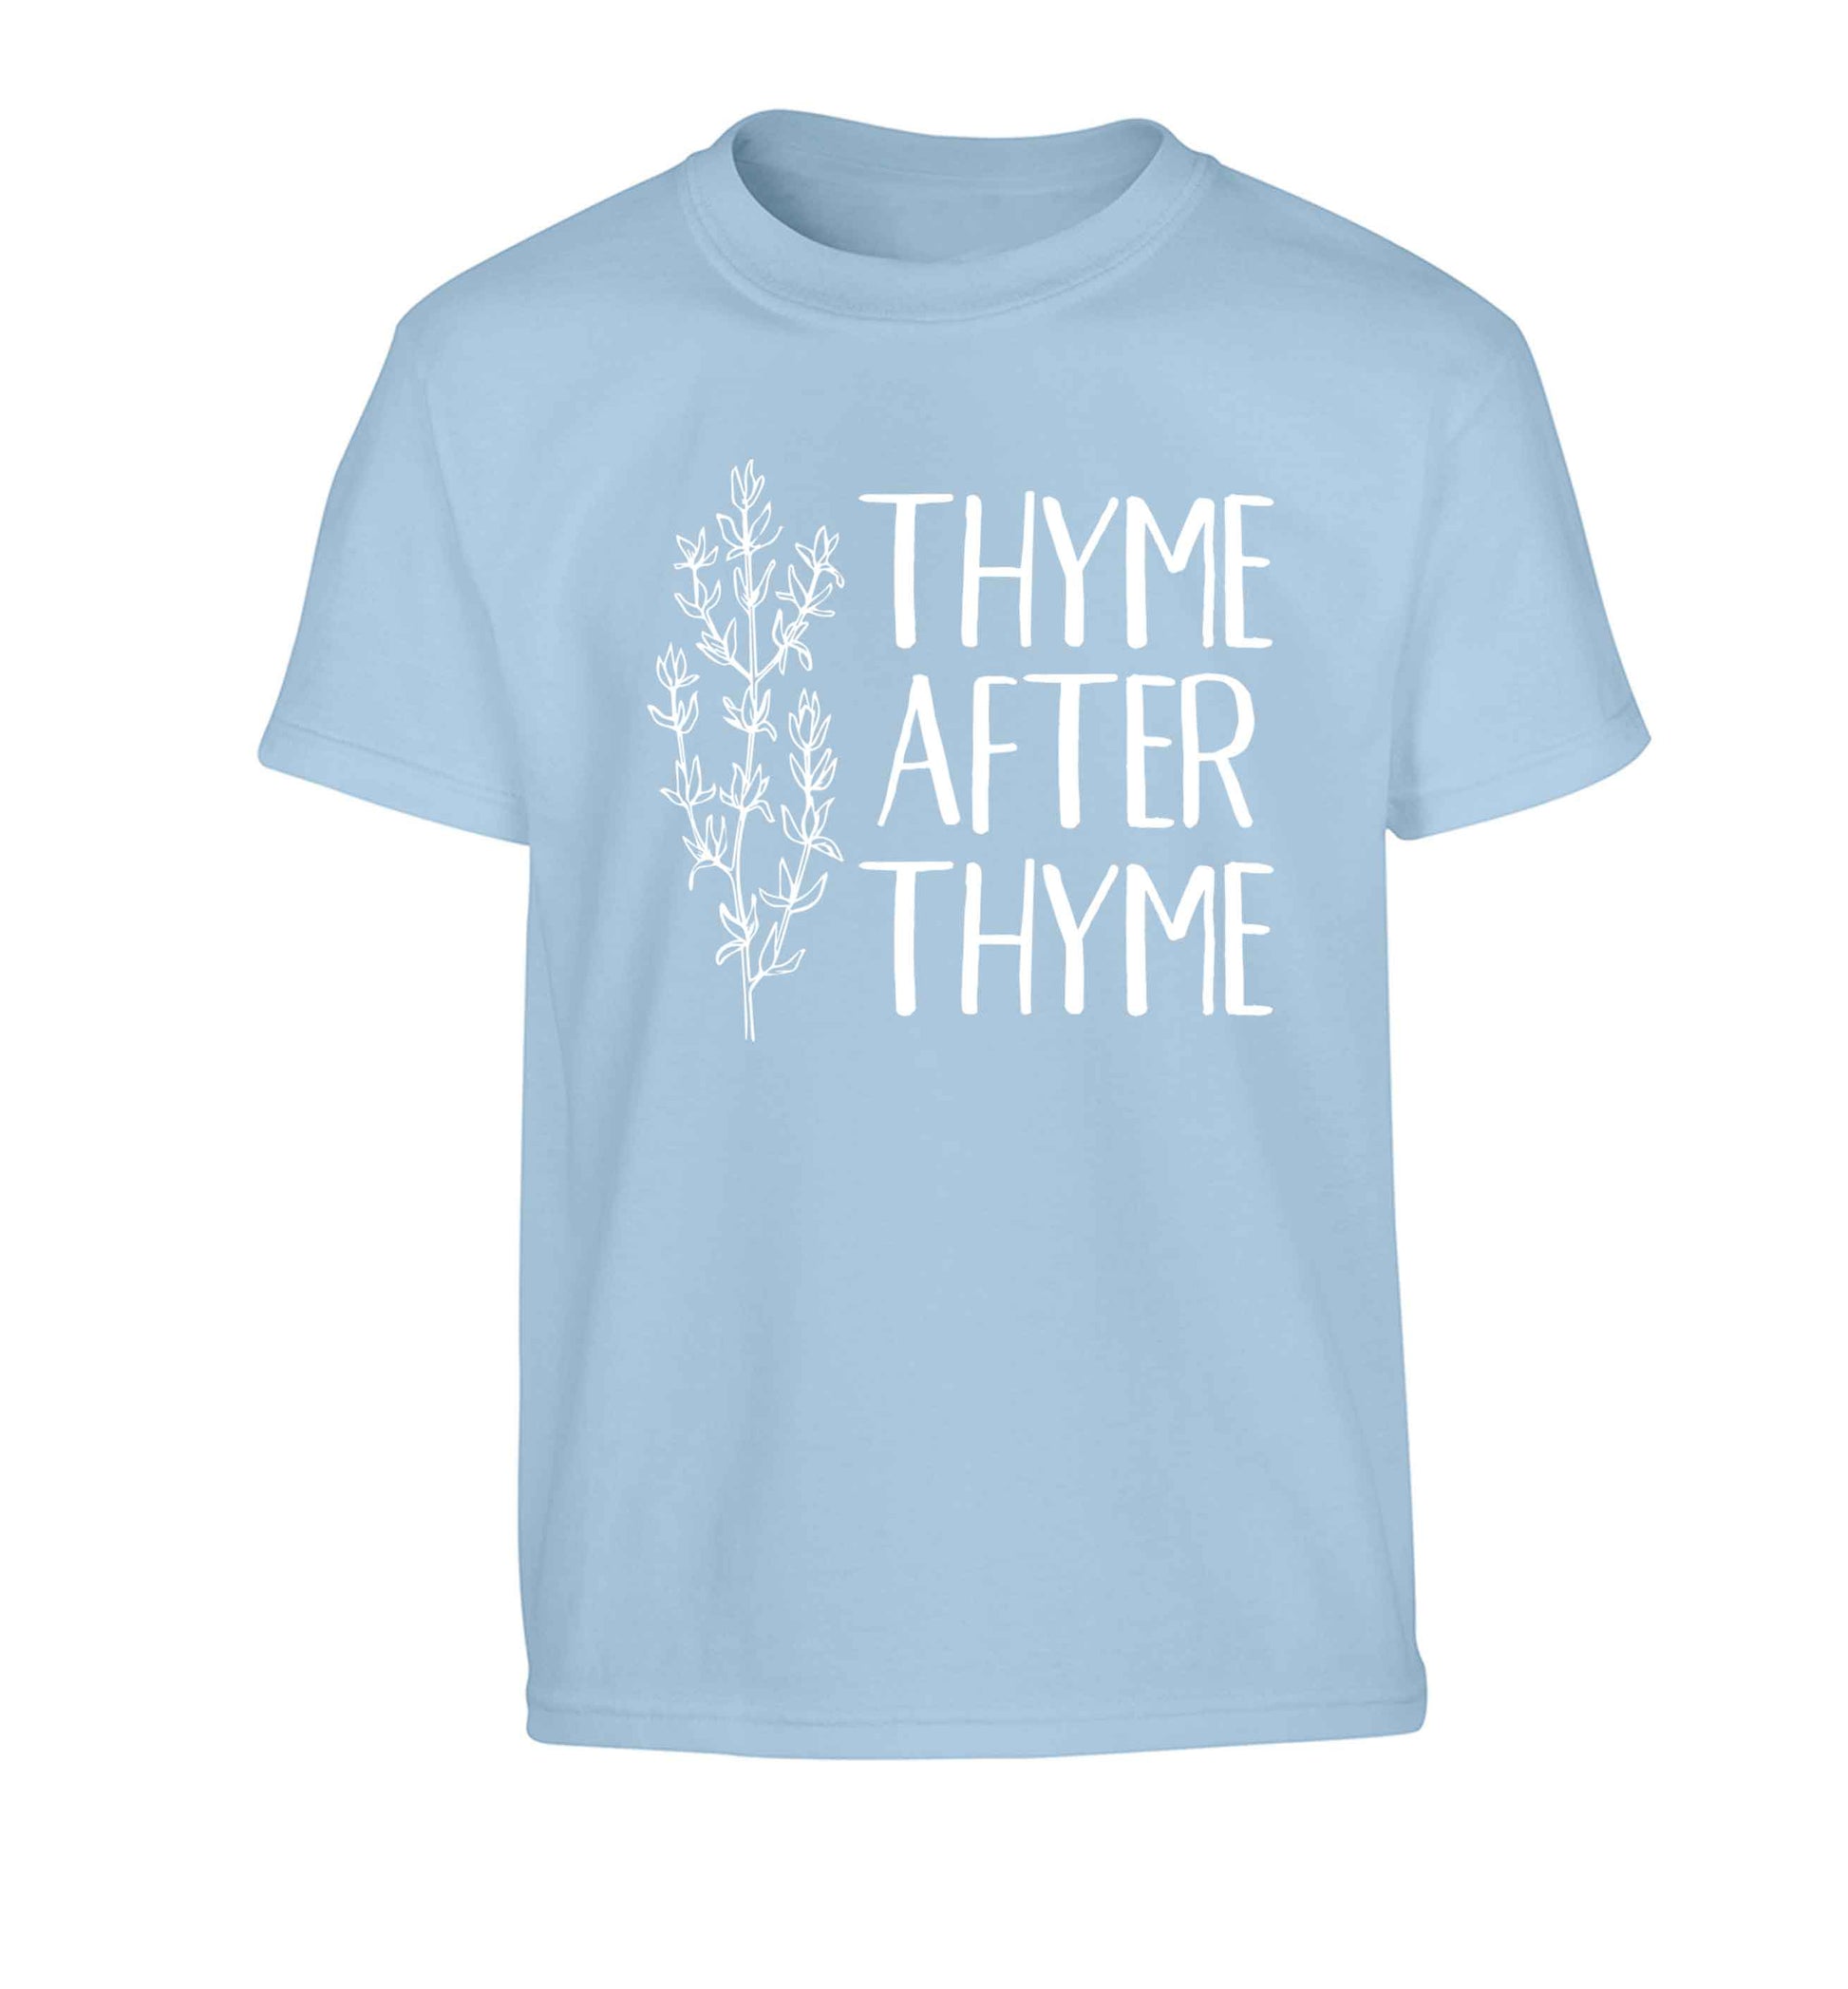 Thyme after thyme Children's light blue Tshirt 12-13 Years